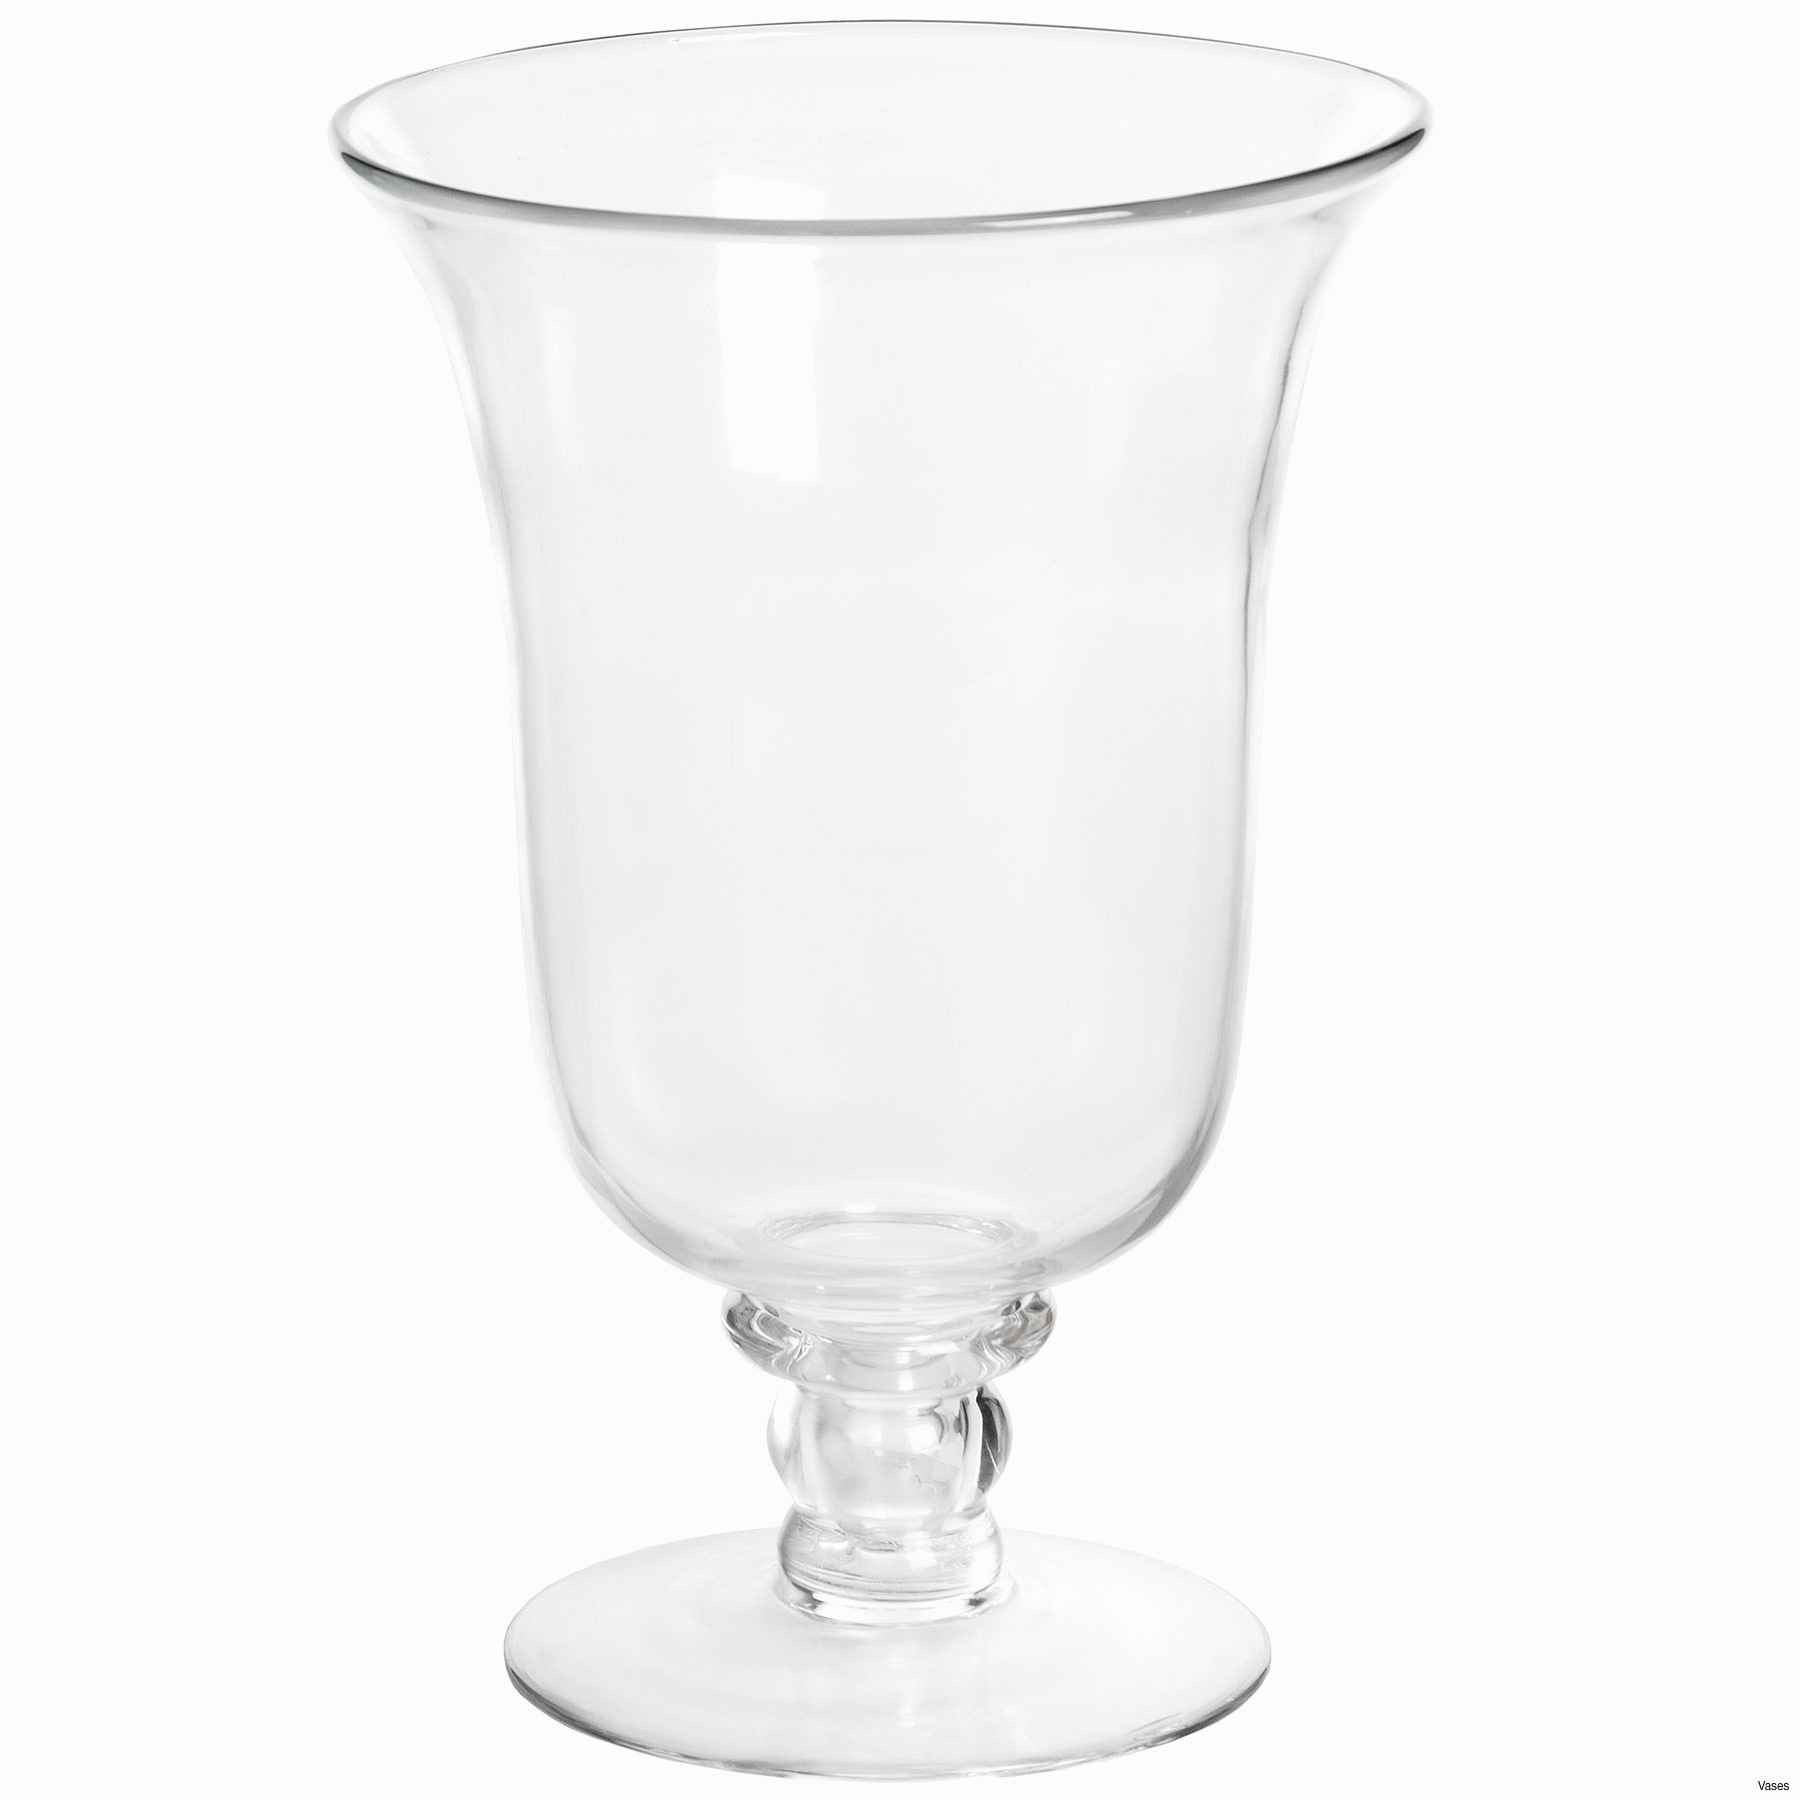 Tall Glass Vases for Sale Of Candle Stands wholesale Lovely Faux Crystal Candle Holders Alive In Candle Stands wholesale Lovely Faux Crystal Candle Holders Alive Vases Gold Tall Jpgi 0d Cheap In